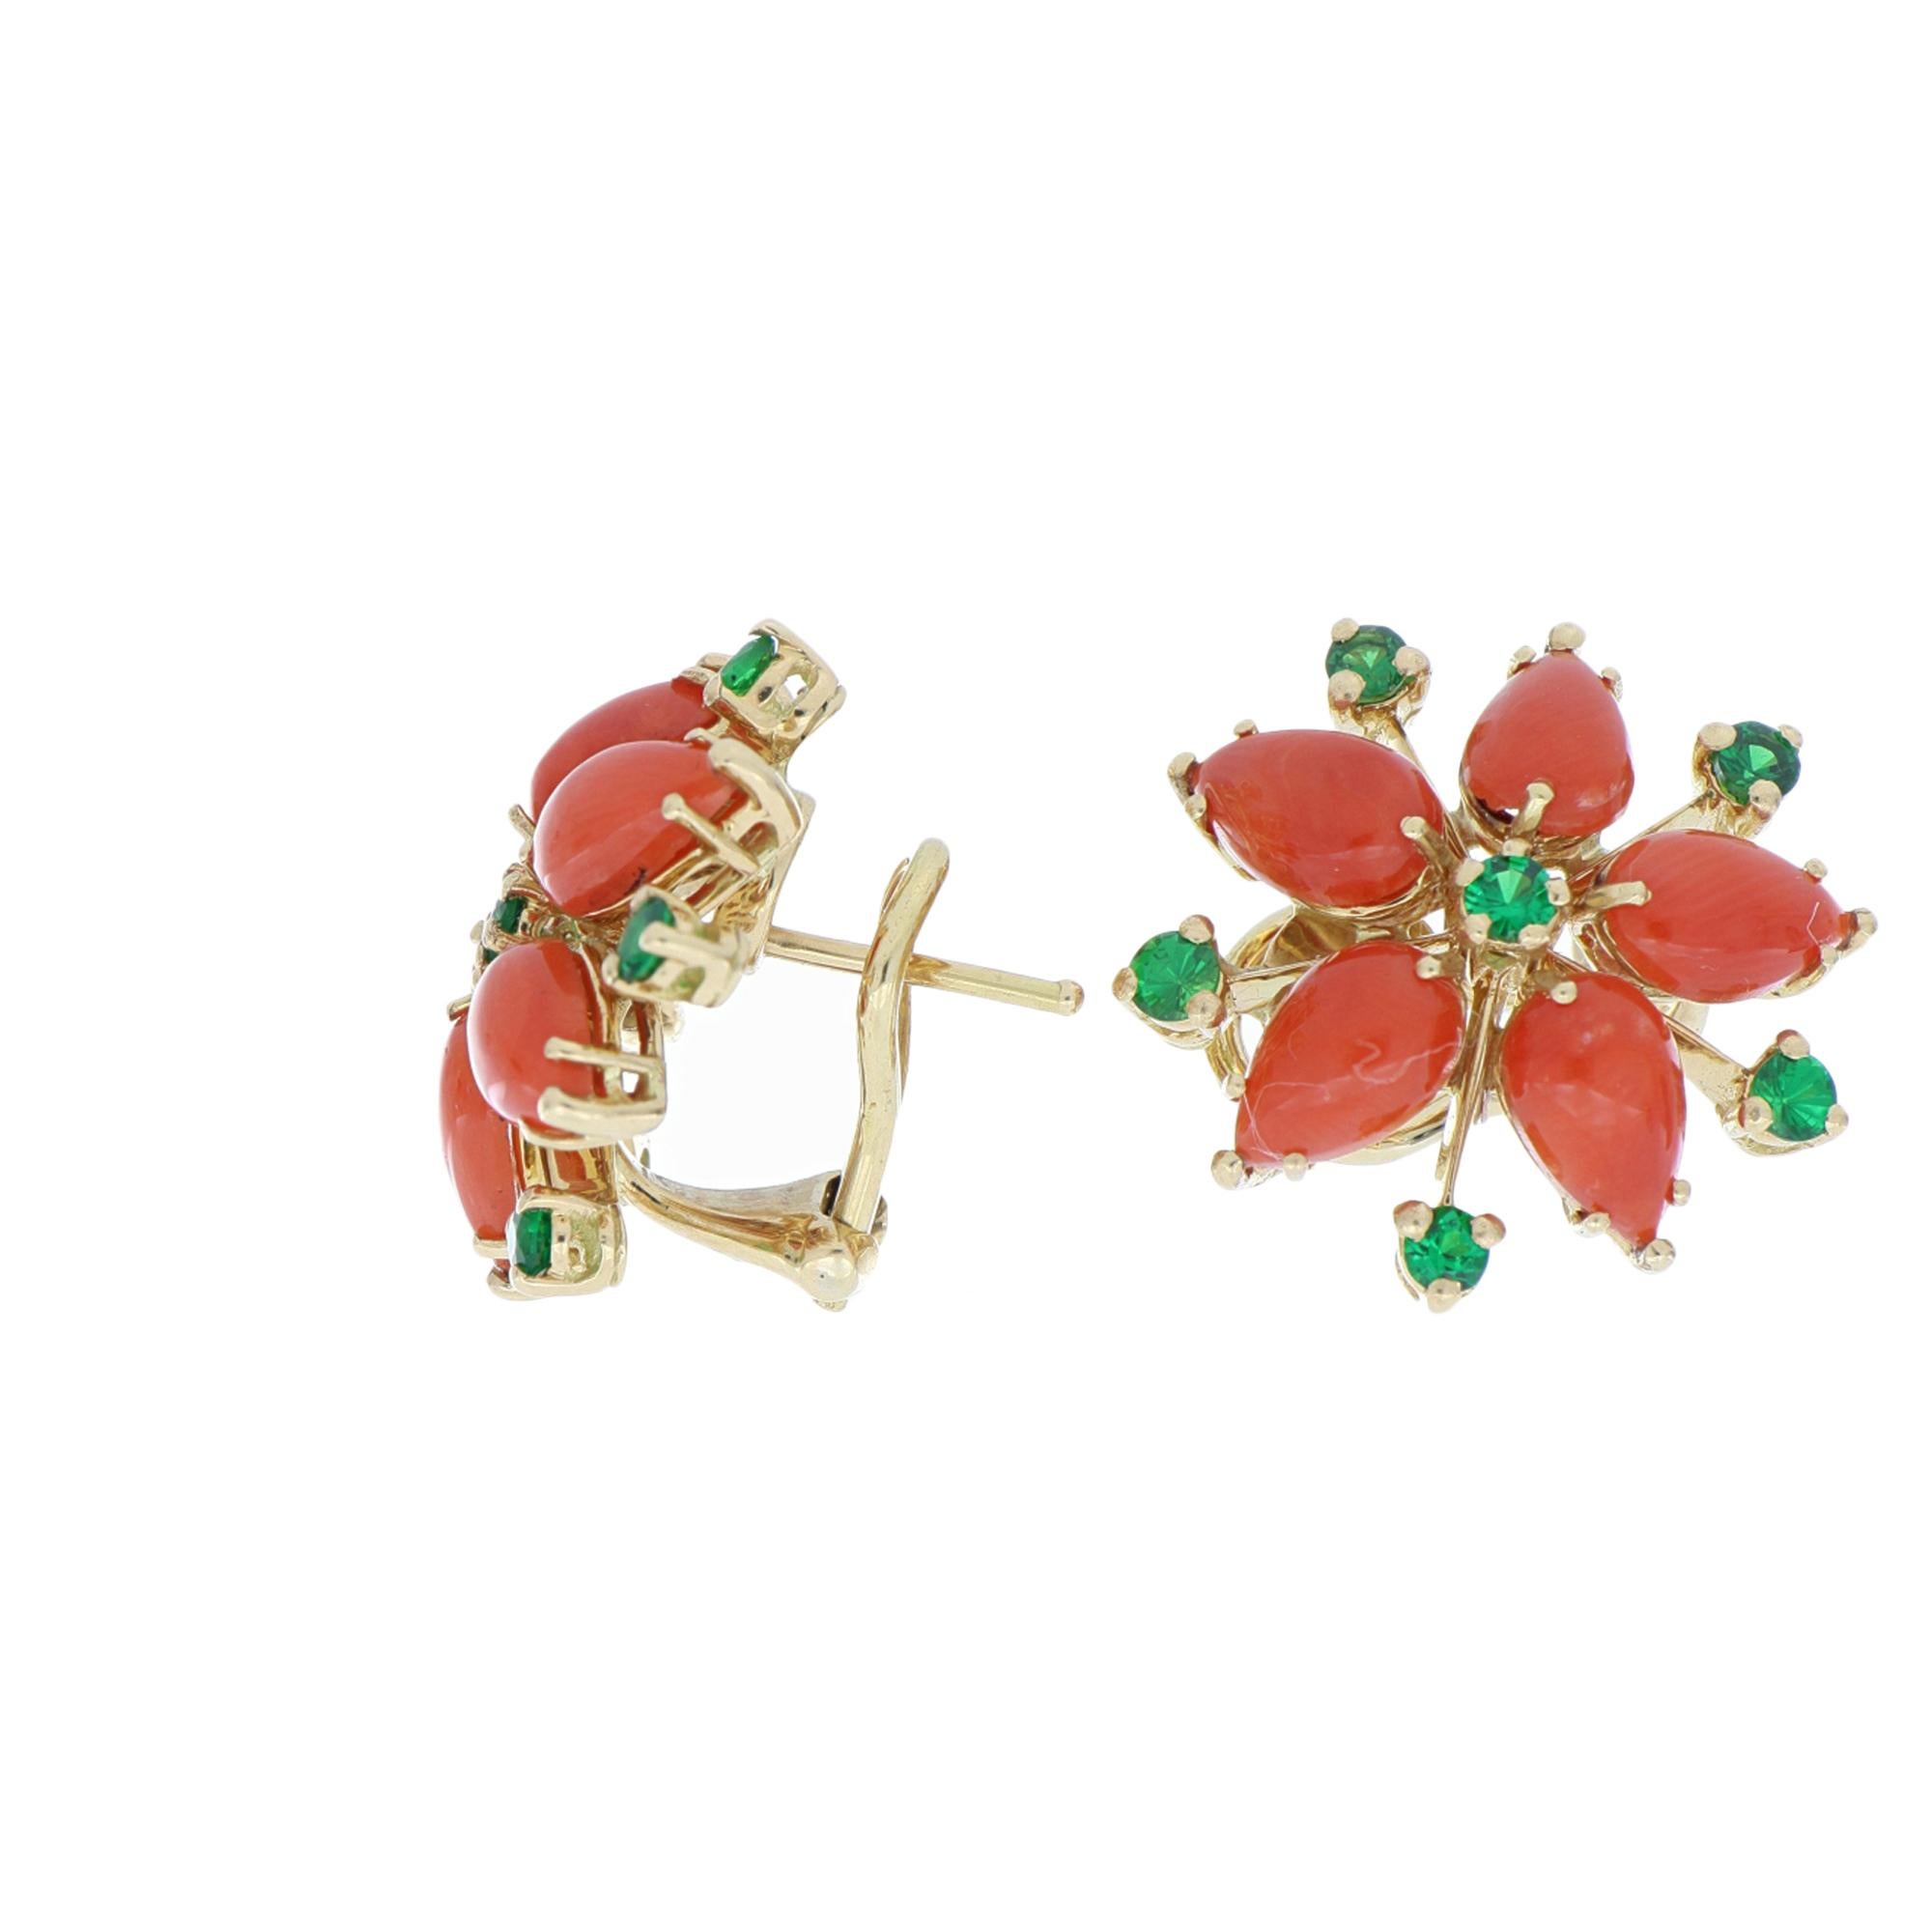 These gorgeous 18 Kt yellow gold earrings recall the wild beauty of nature. 5 corals make up the petals of these beautiful flowers that also feature round green tsavorite accent stones.
Coral bears the rather charming nick-name of “Sea’s Garden” in